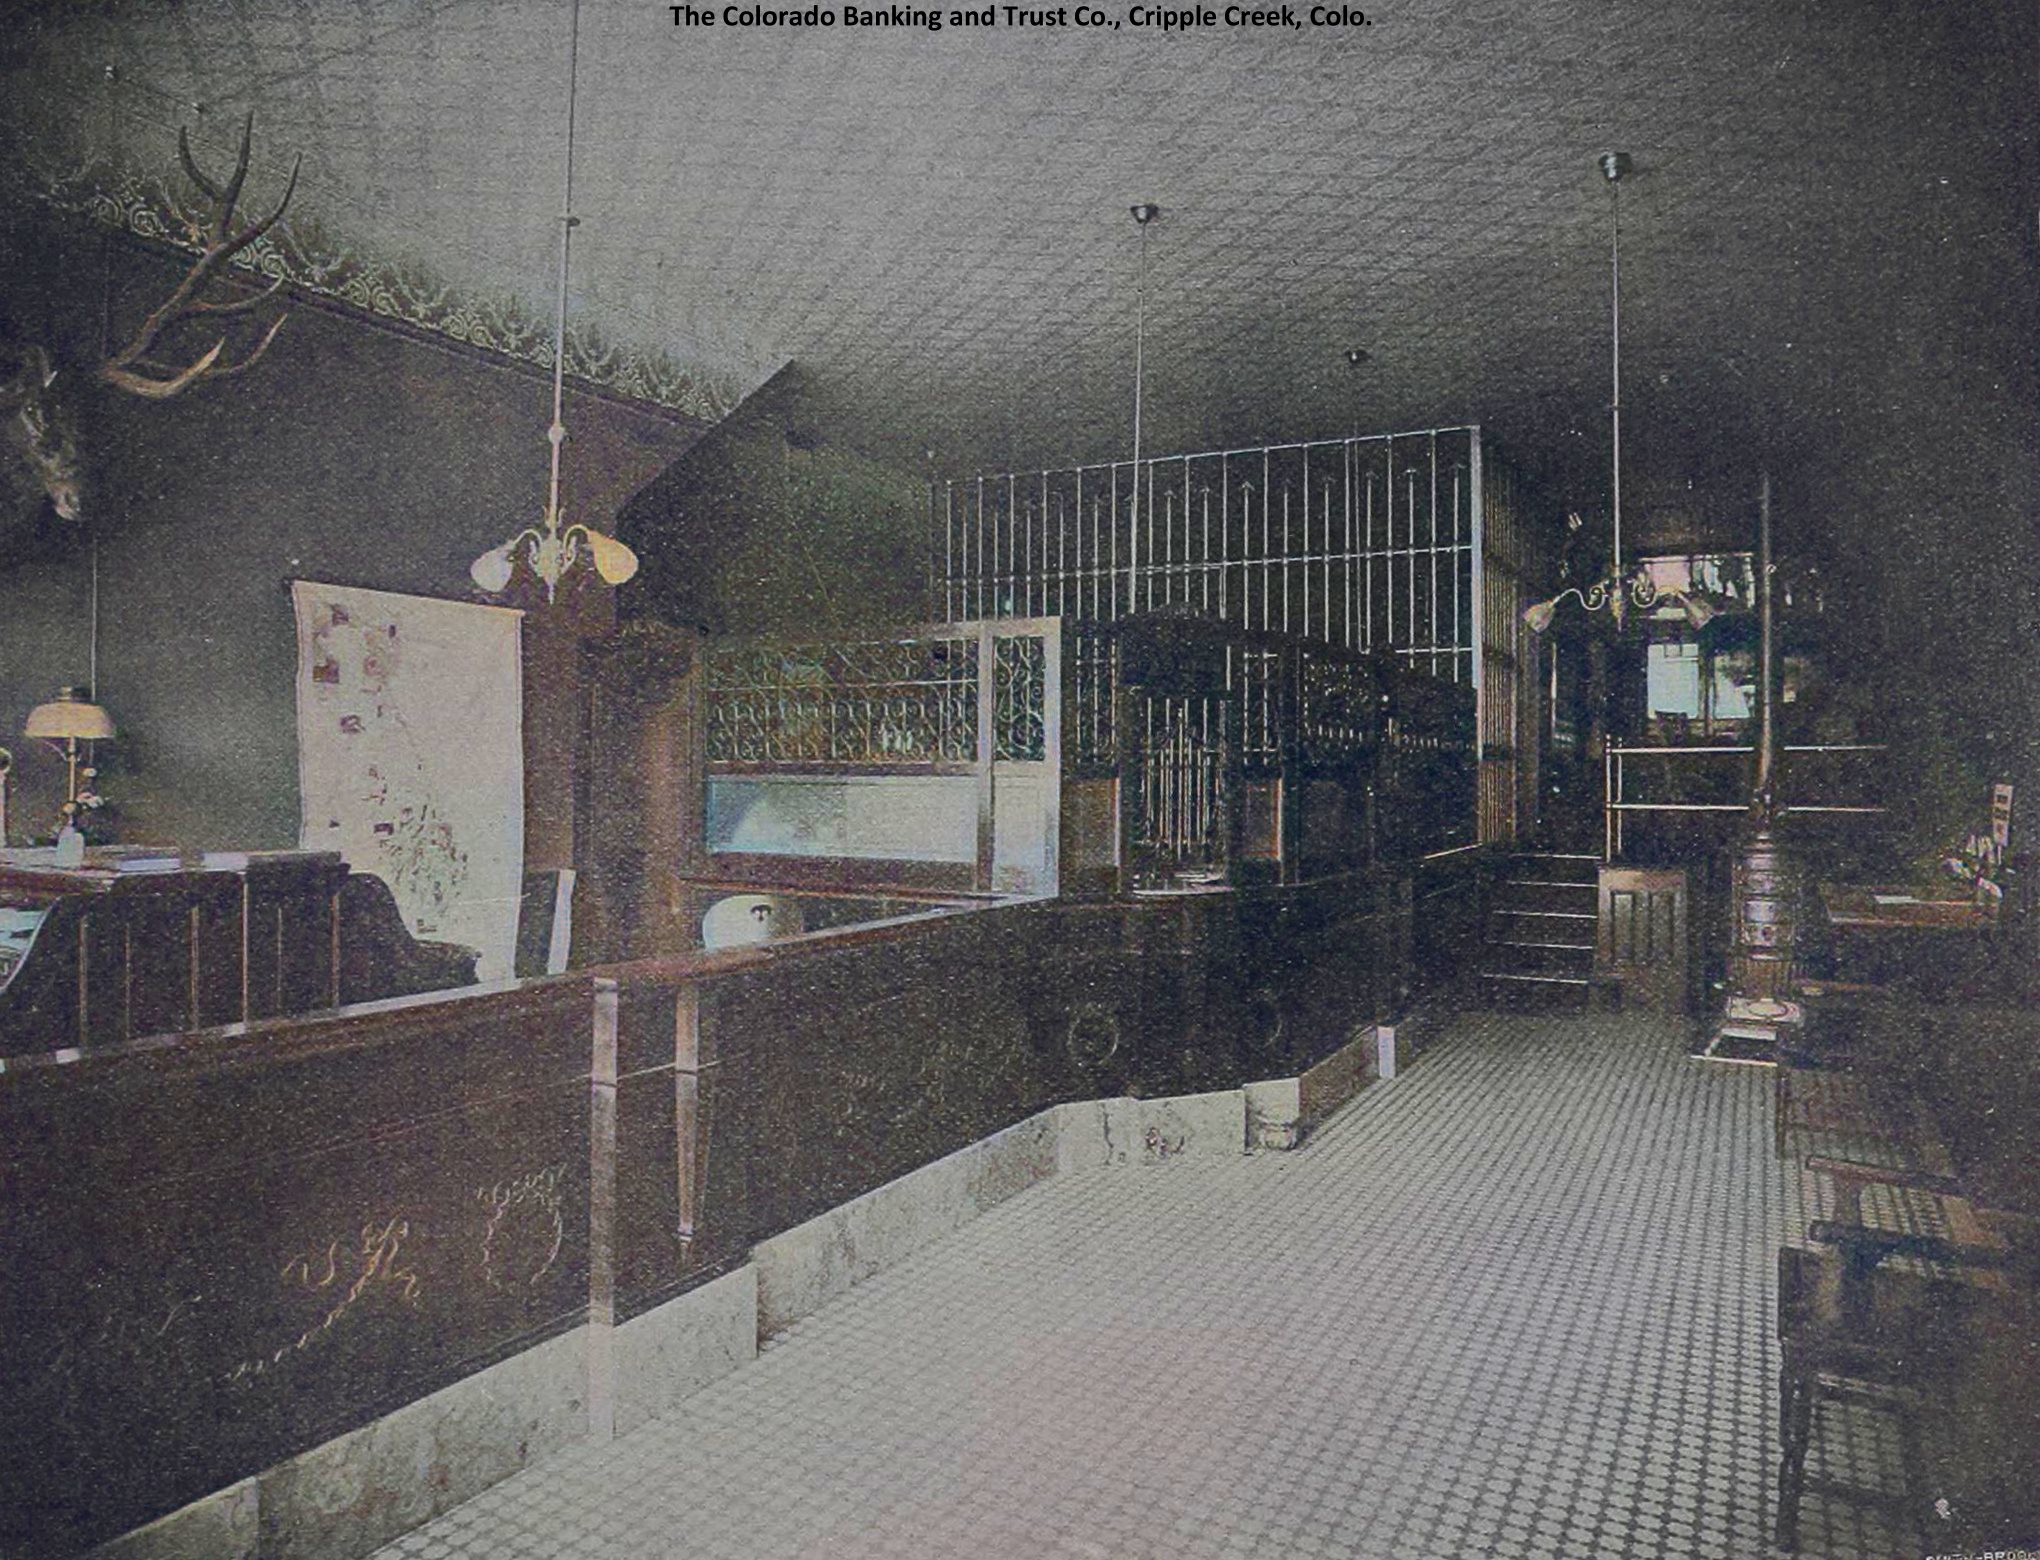 Interior View of The Colorado Banking and Trust Co., Cripple Creek